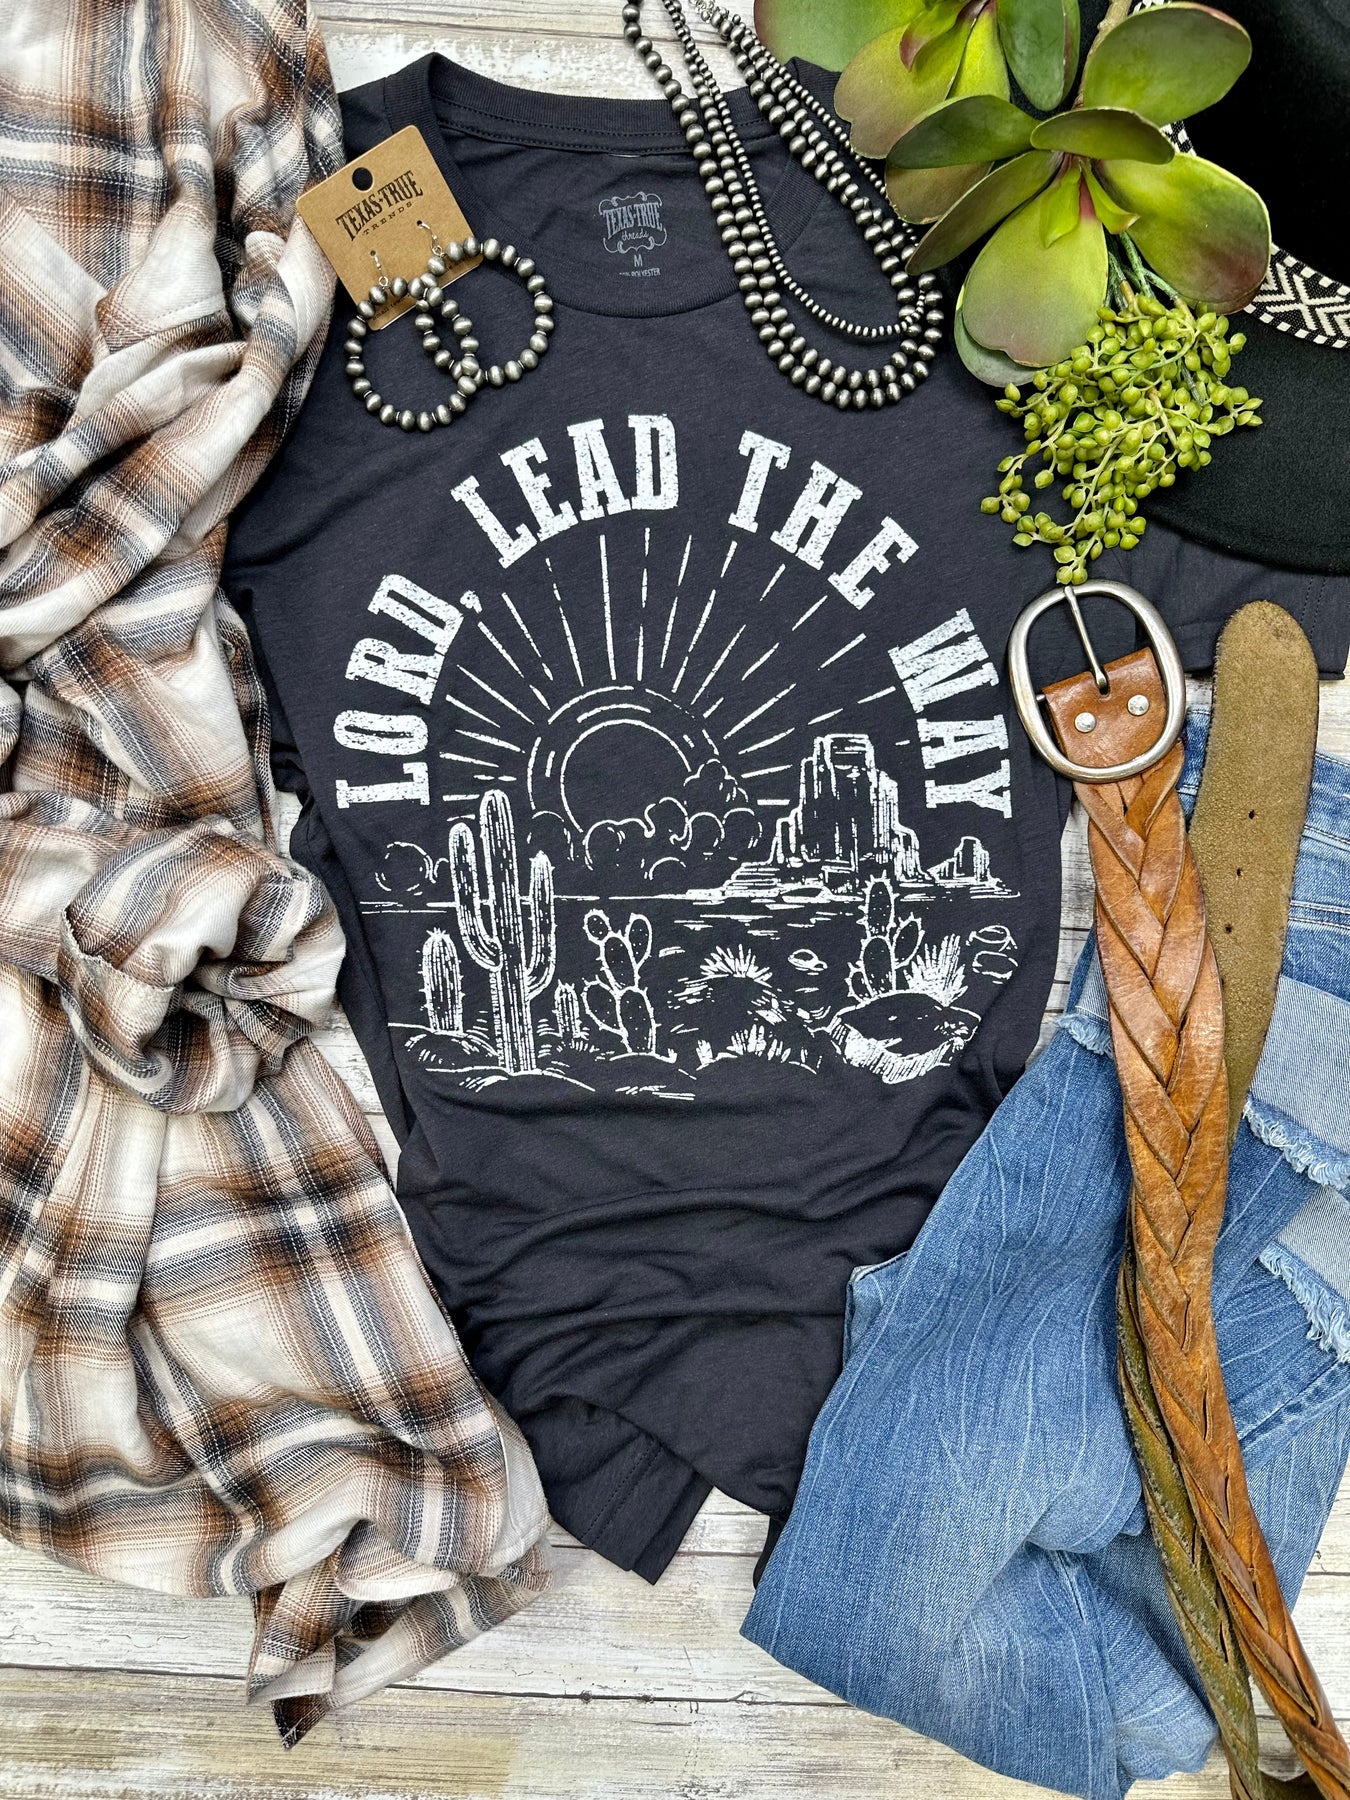 Lord Lead The Way Graphic Tee by Texas True Threads